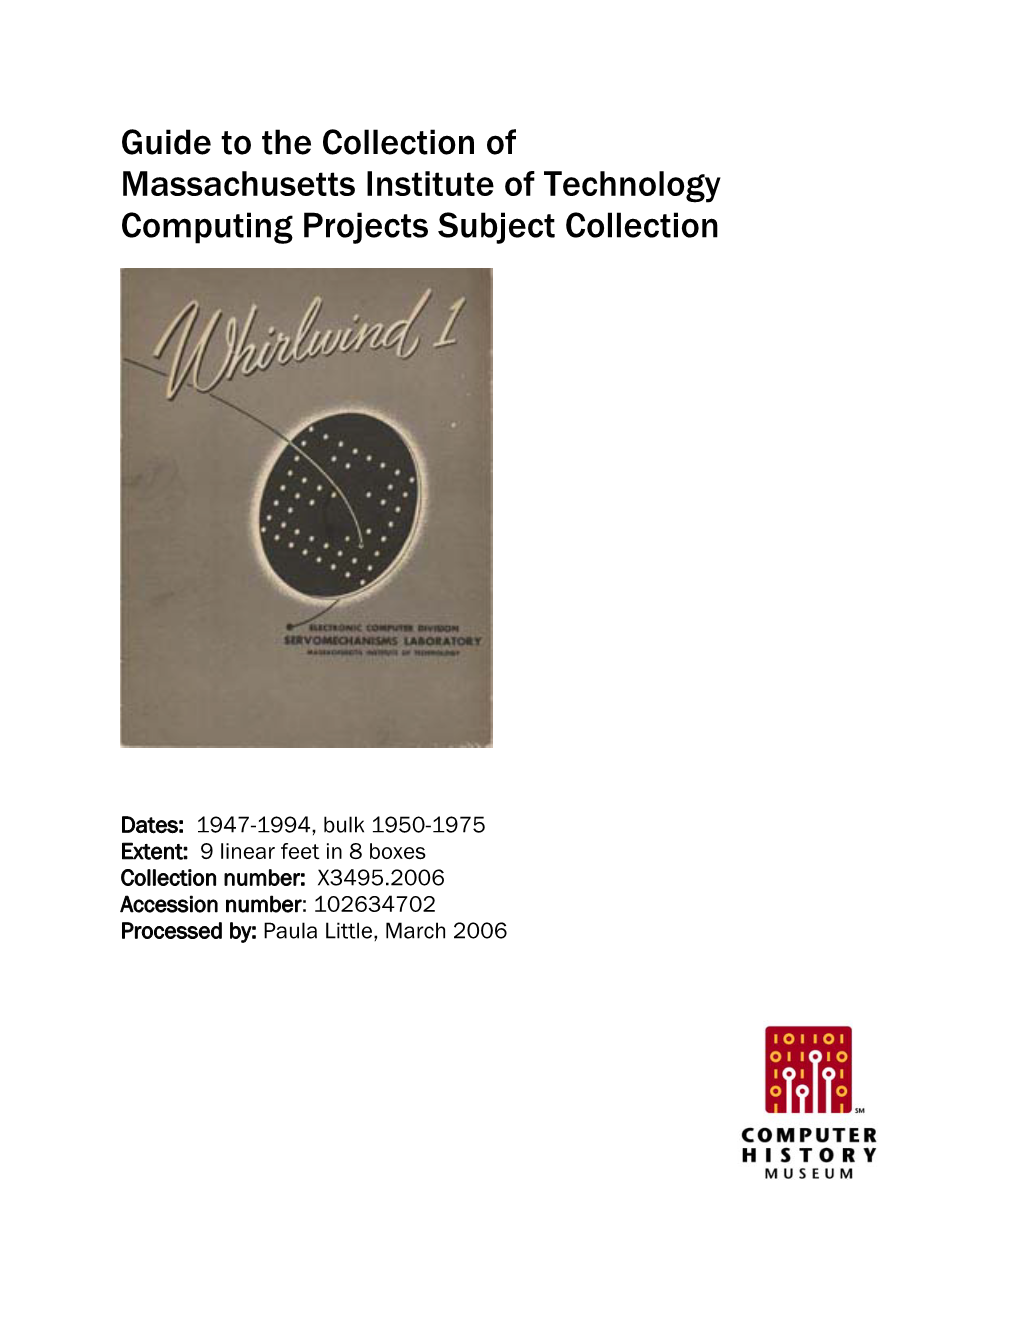 Guide to the Collection of Massachusetts Institute of Technology Computing Projects Subject Collection